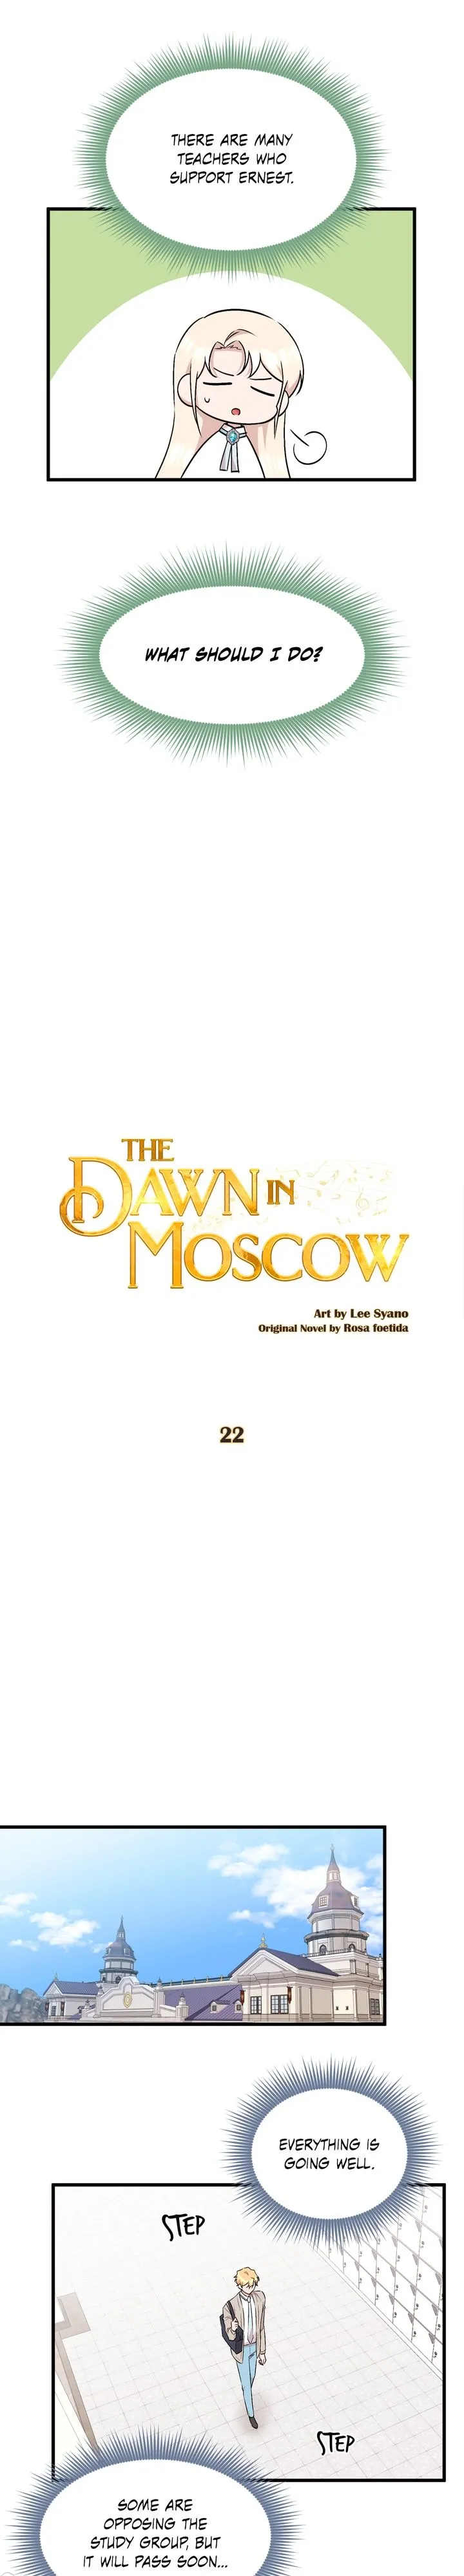 Moscow’s Dawn chapter 22